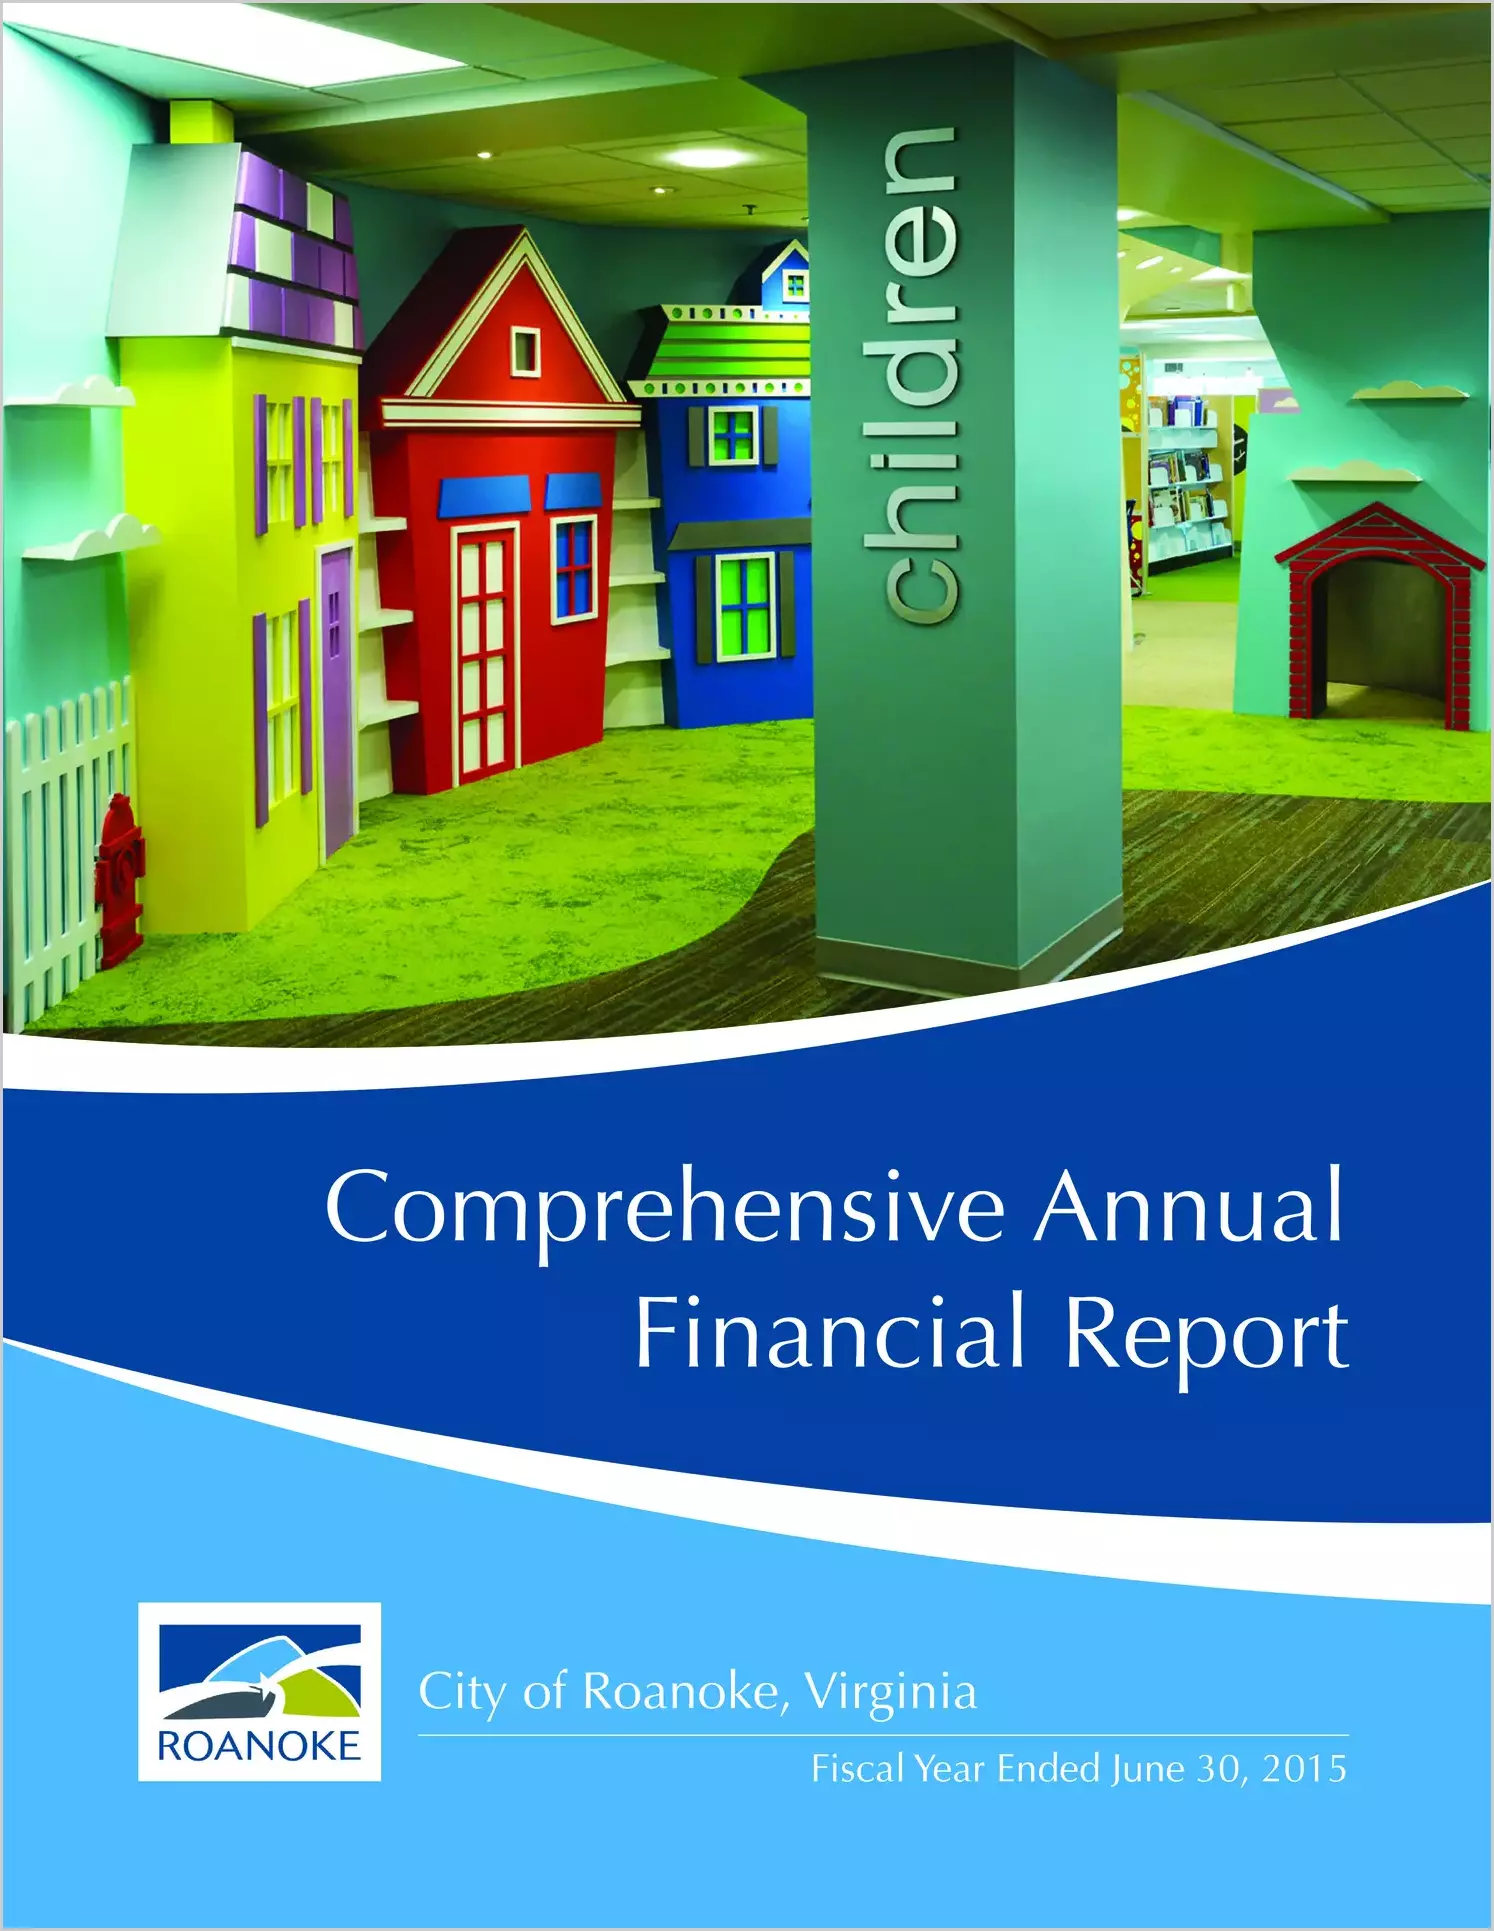 2015 Annual Financial Report for City of Roanoke